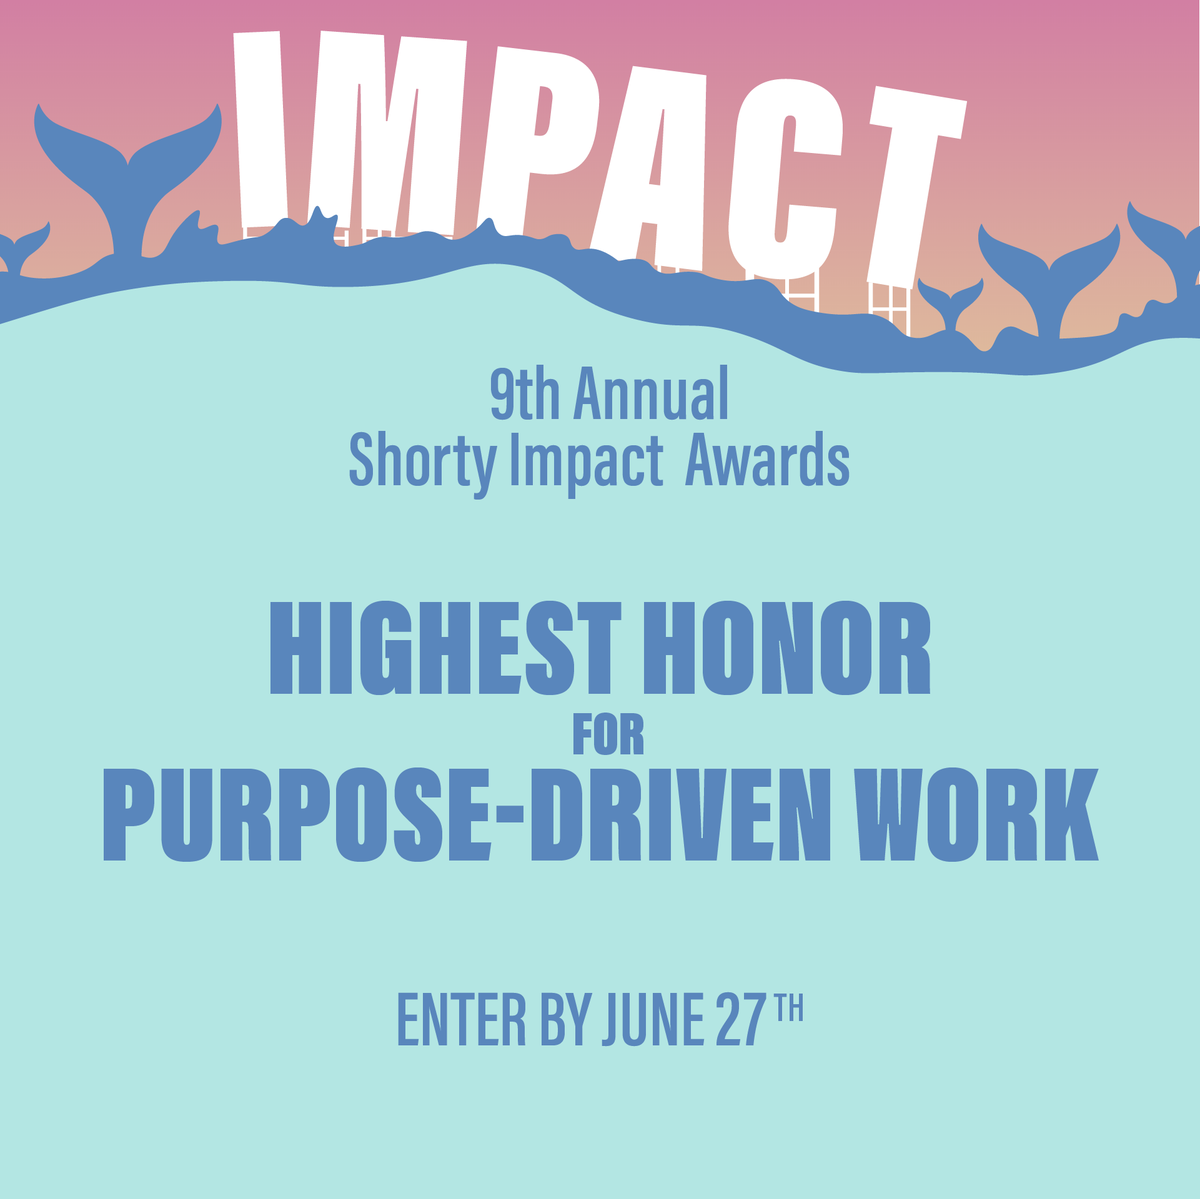 Creating impactful work? Apply for the #shortyimpact awards! Learn more here: shortyawards.com/impact-awards/ Entries will open on May 14th, and the early deadline is June 27th. @shortyawards